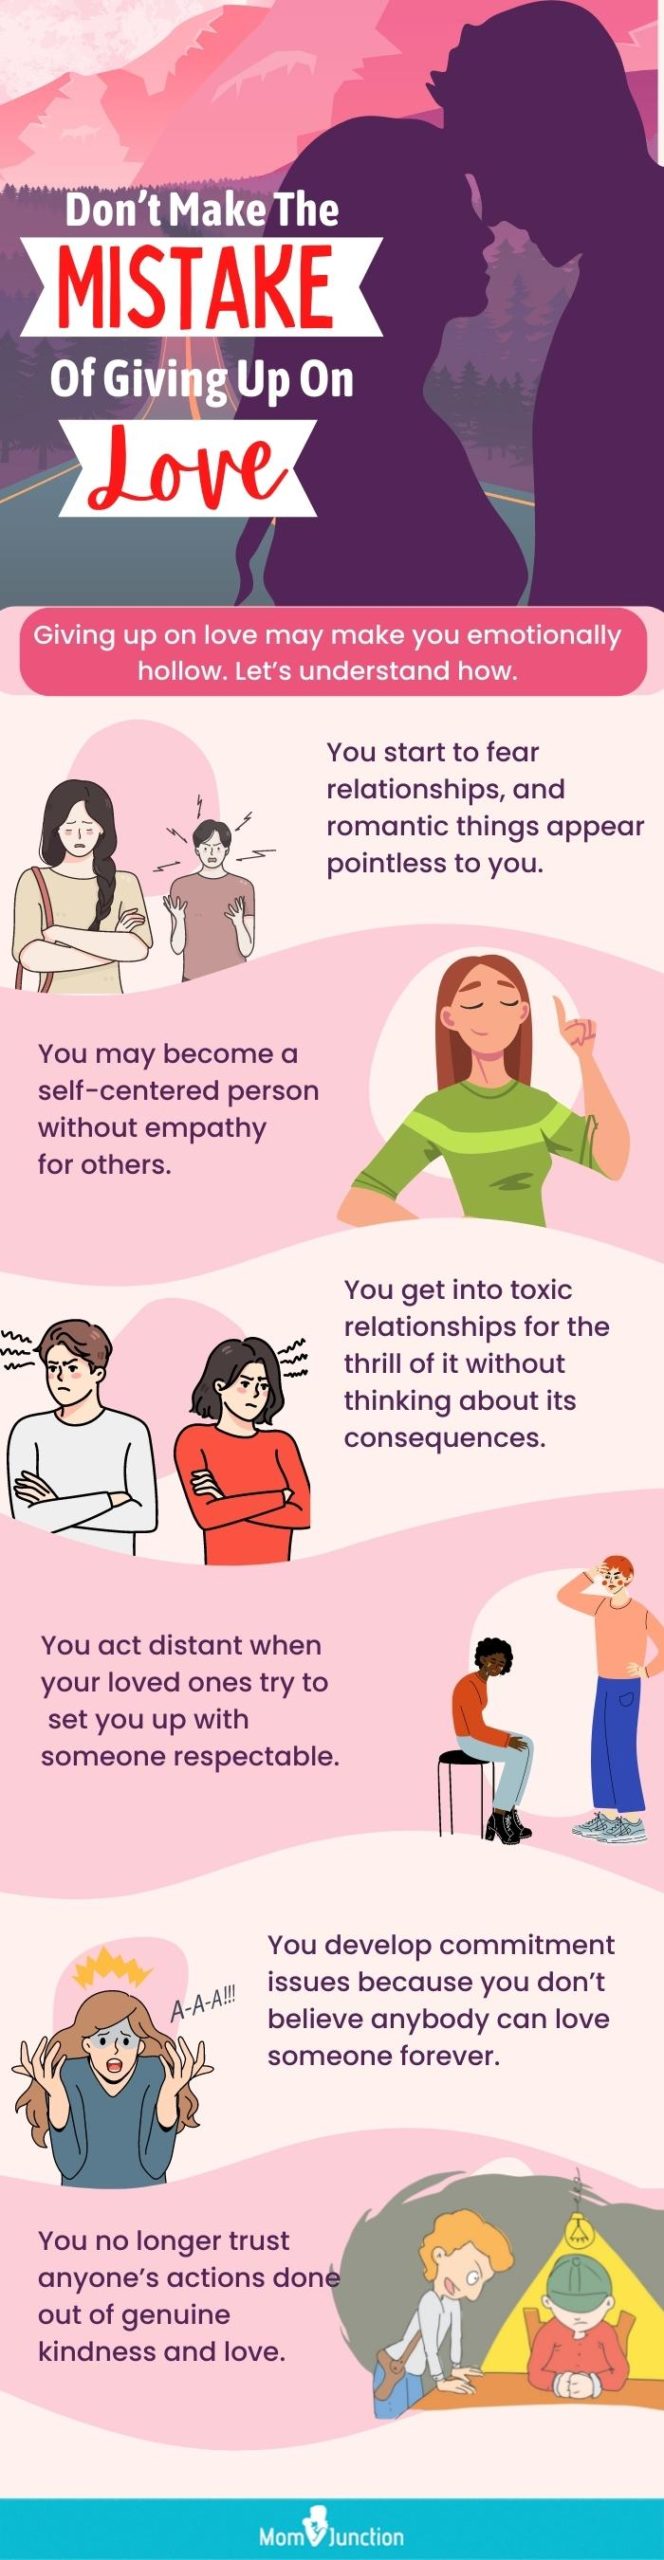 don’t make the mistake of giving up on love (infographic)